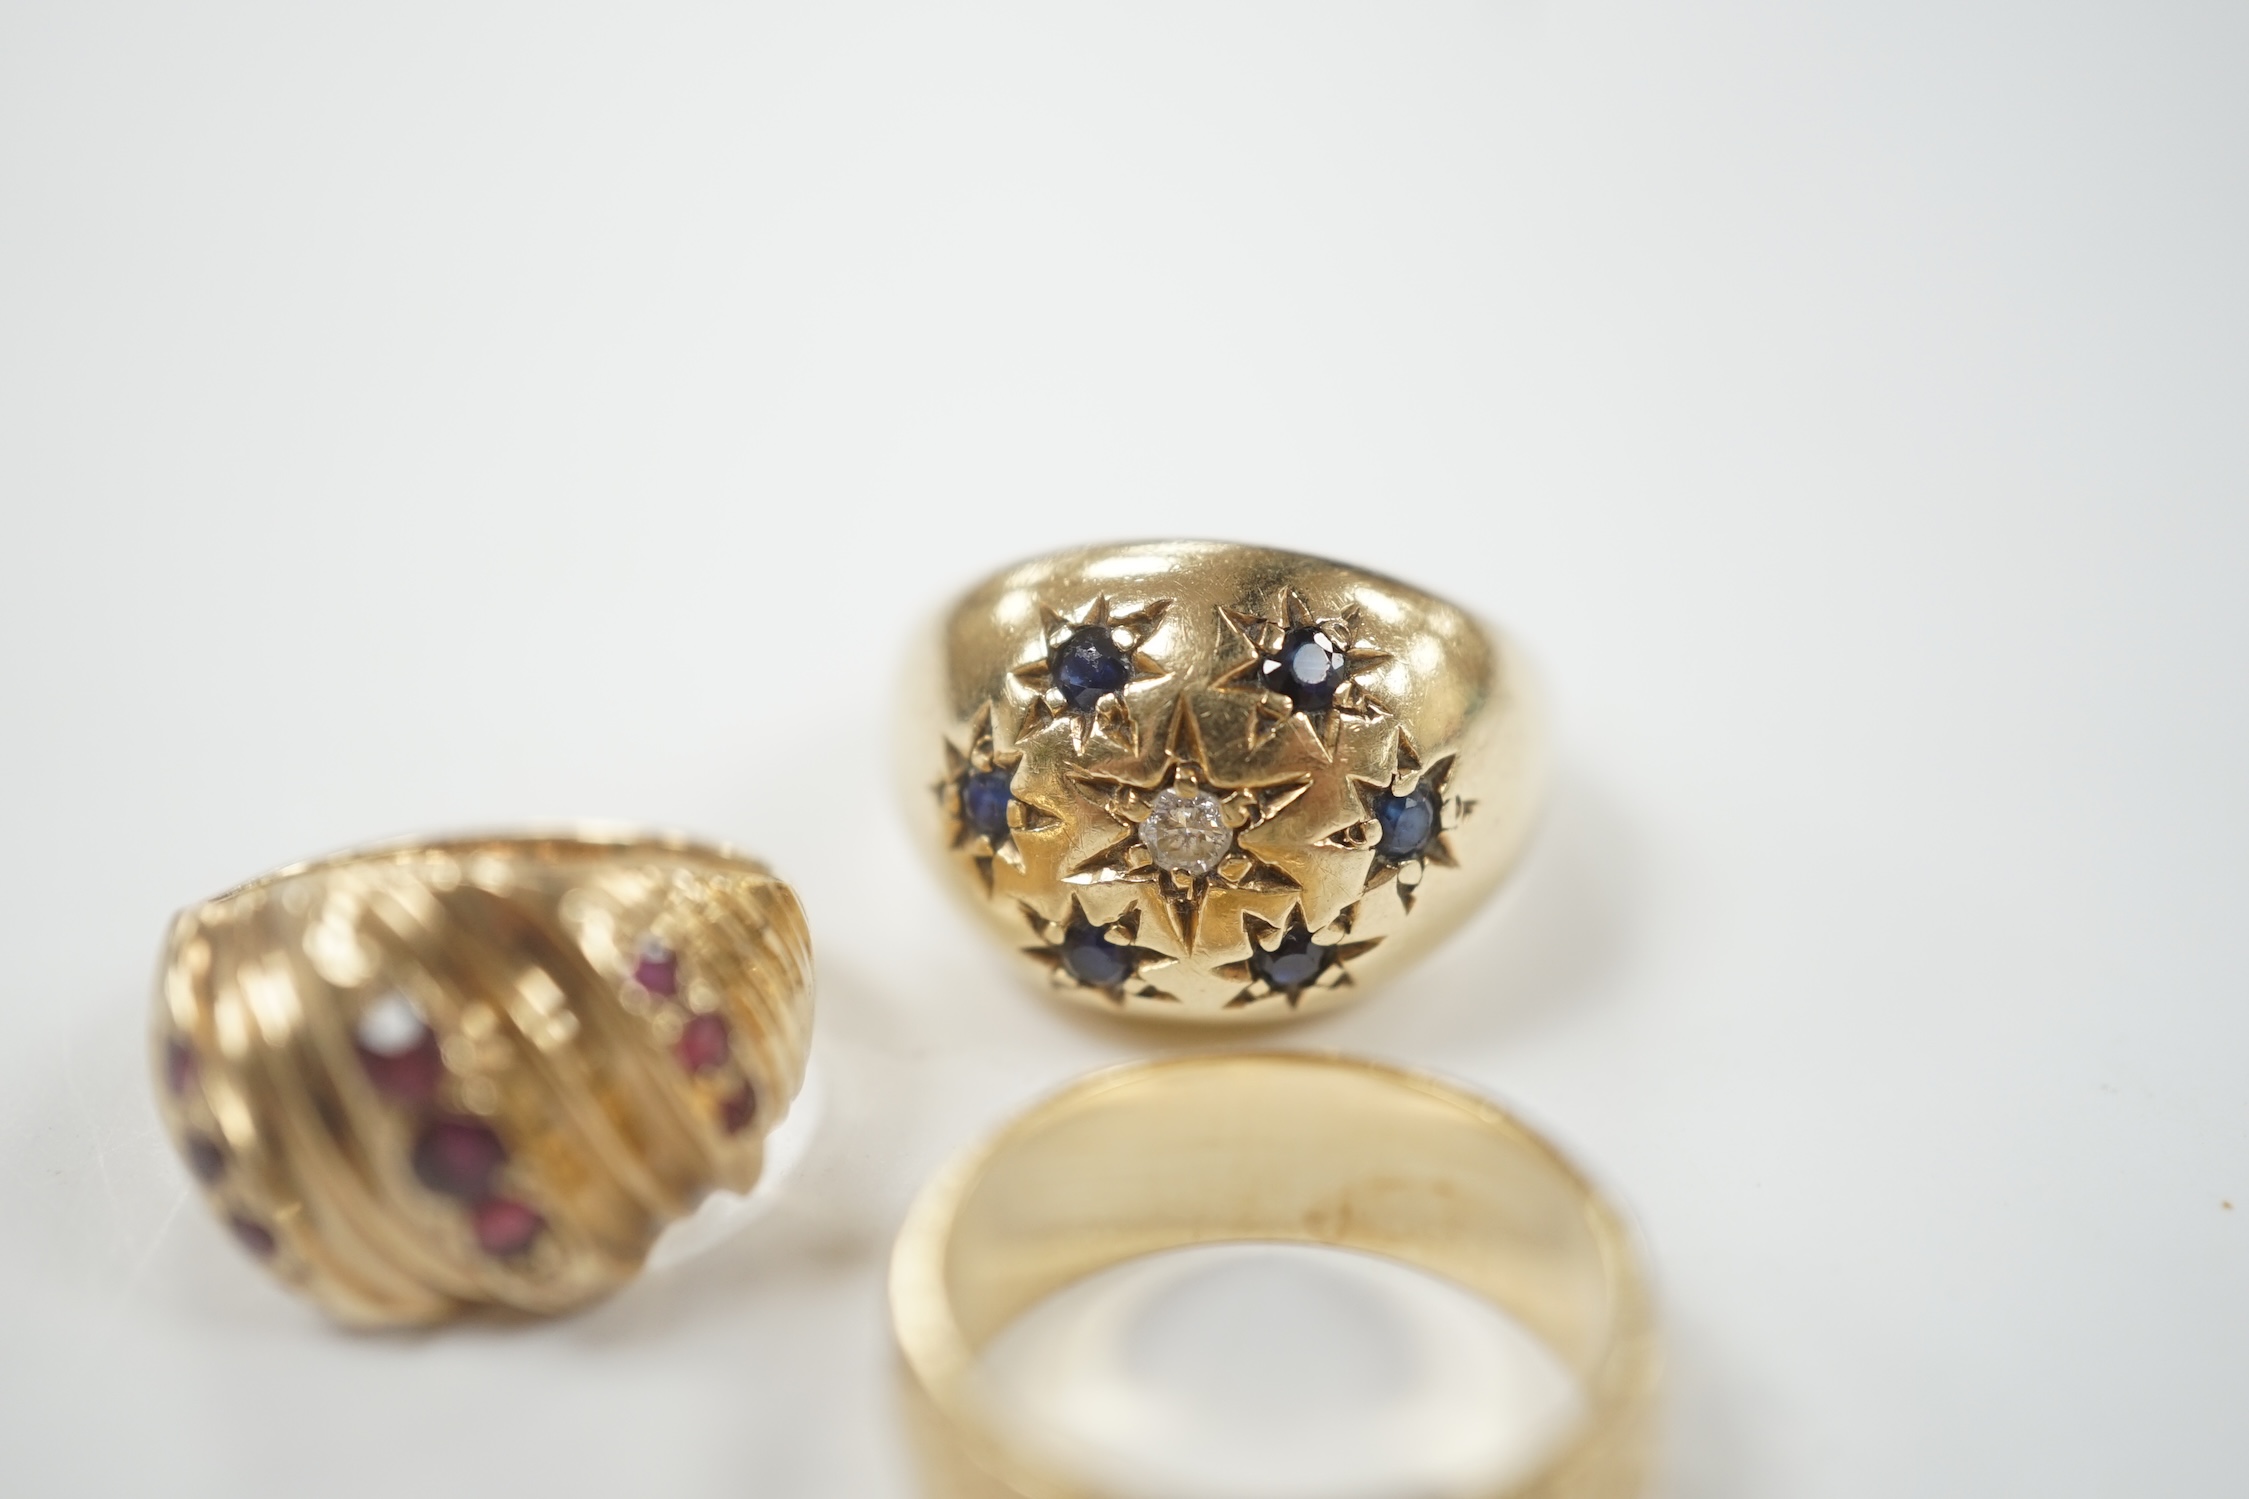 Two modern 9ct gold and gem set dress rings and a similar engraved 9ct gold band